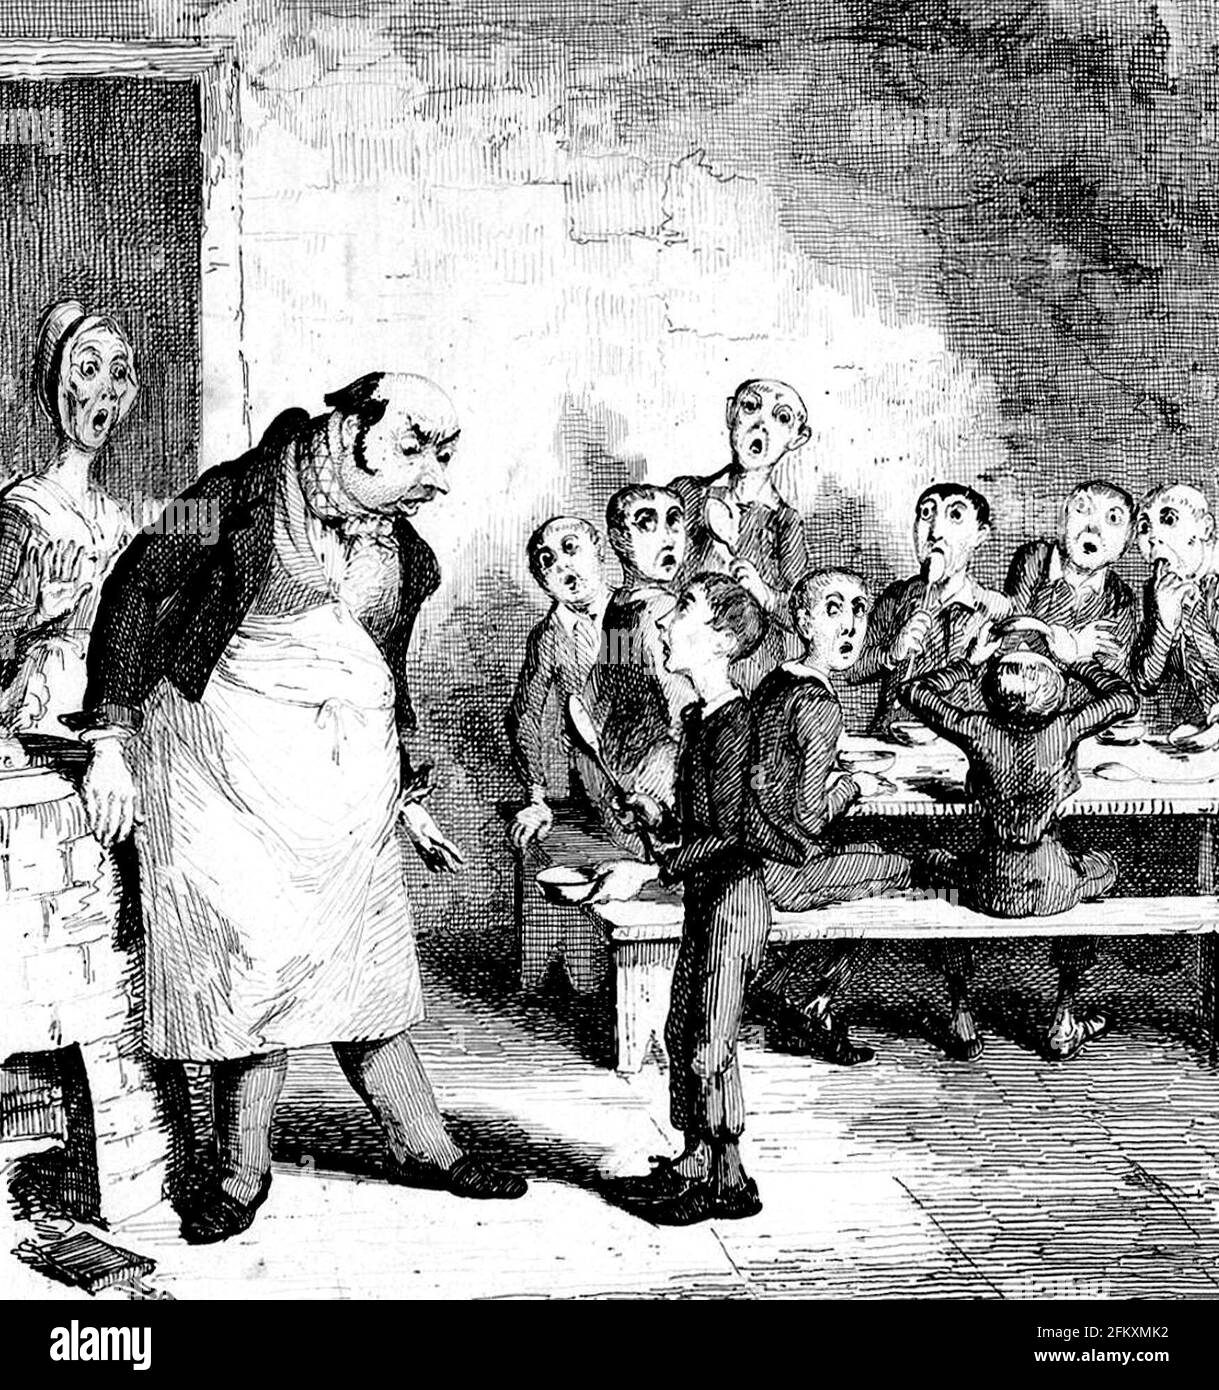 Oliver Twist. Illustration from the frontispiece to a first edition of Charles Dickens' 'Oliver Twist', George Cruikshank, 1838 Stock Photo